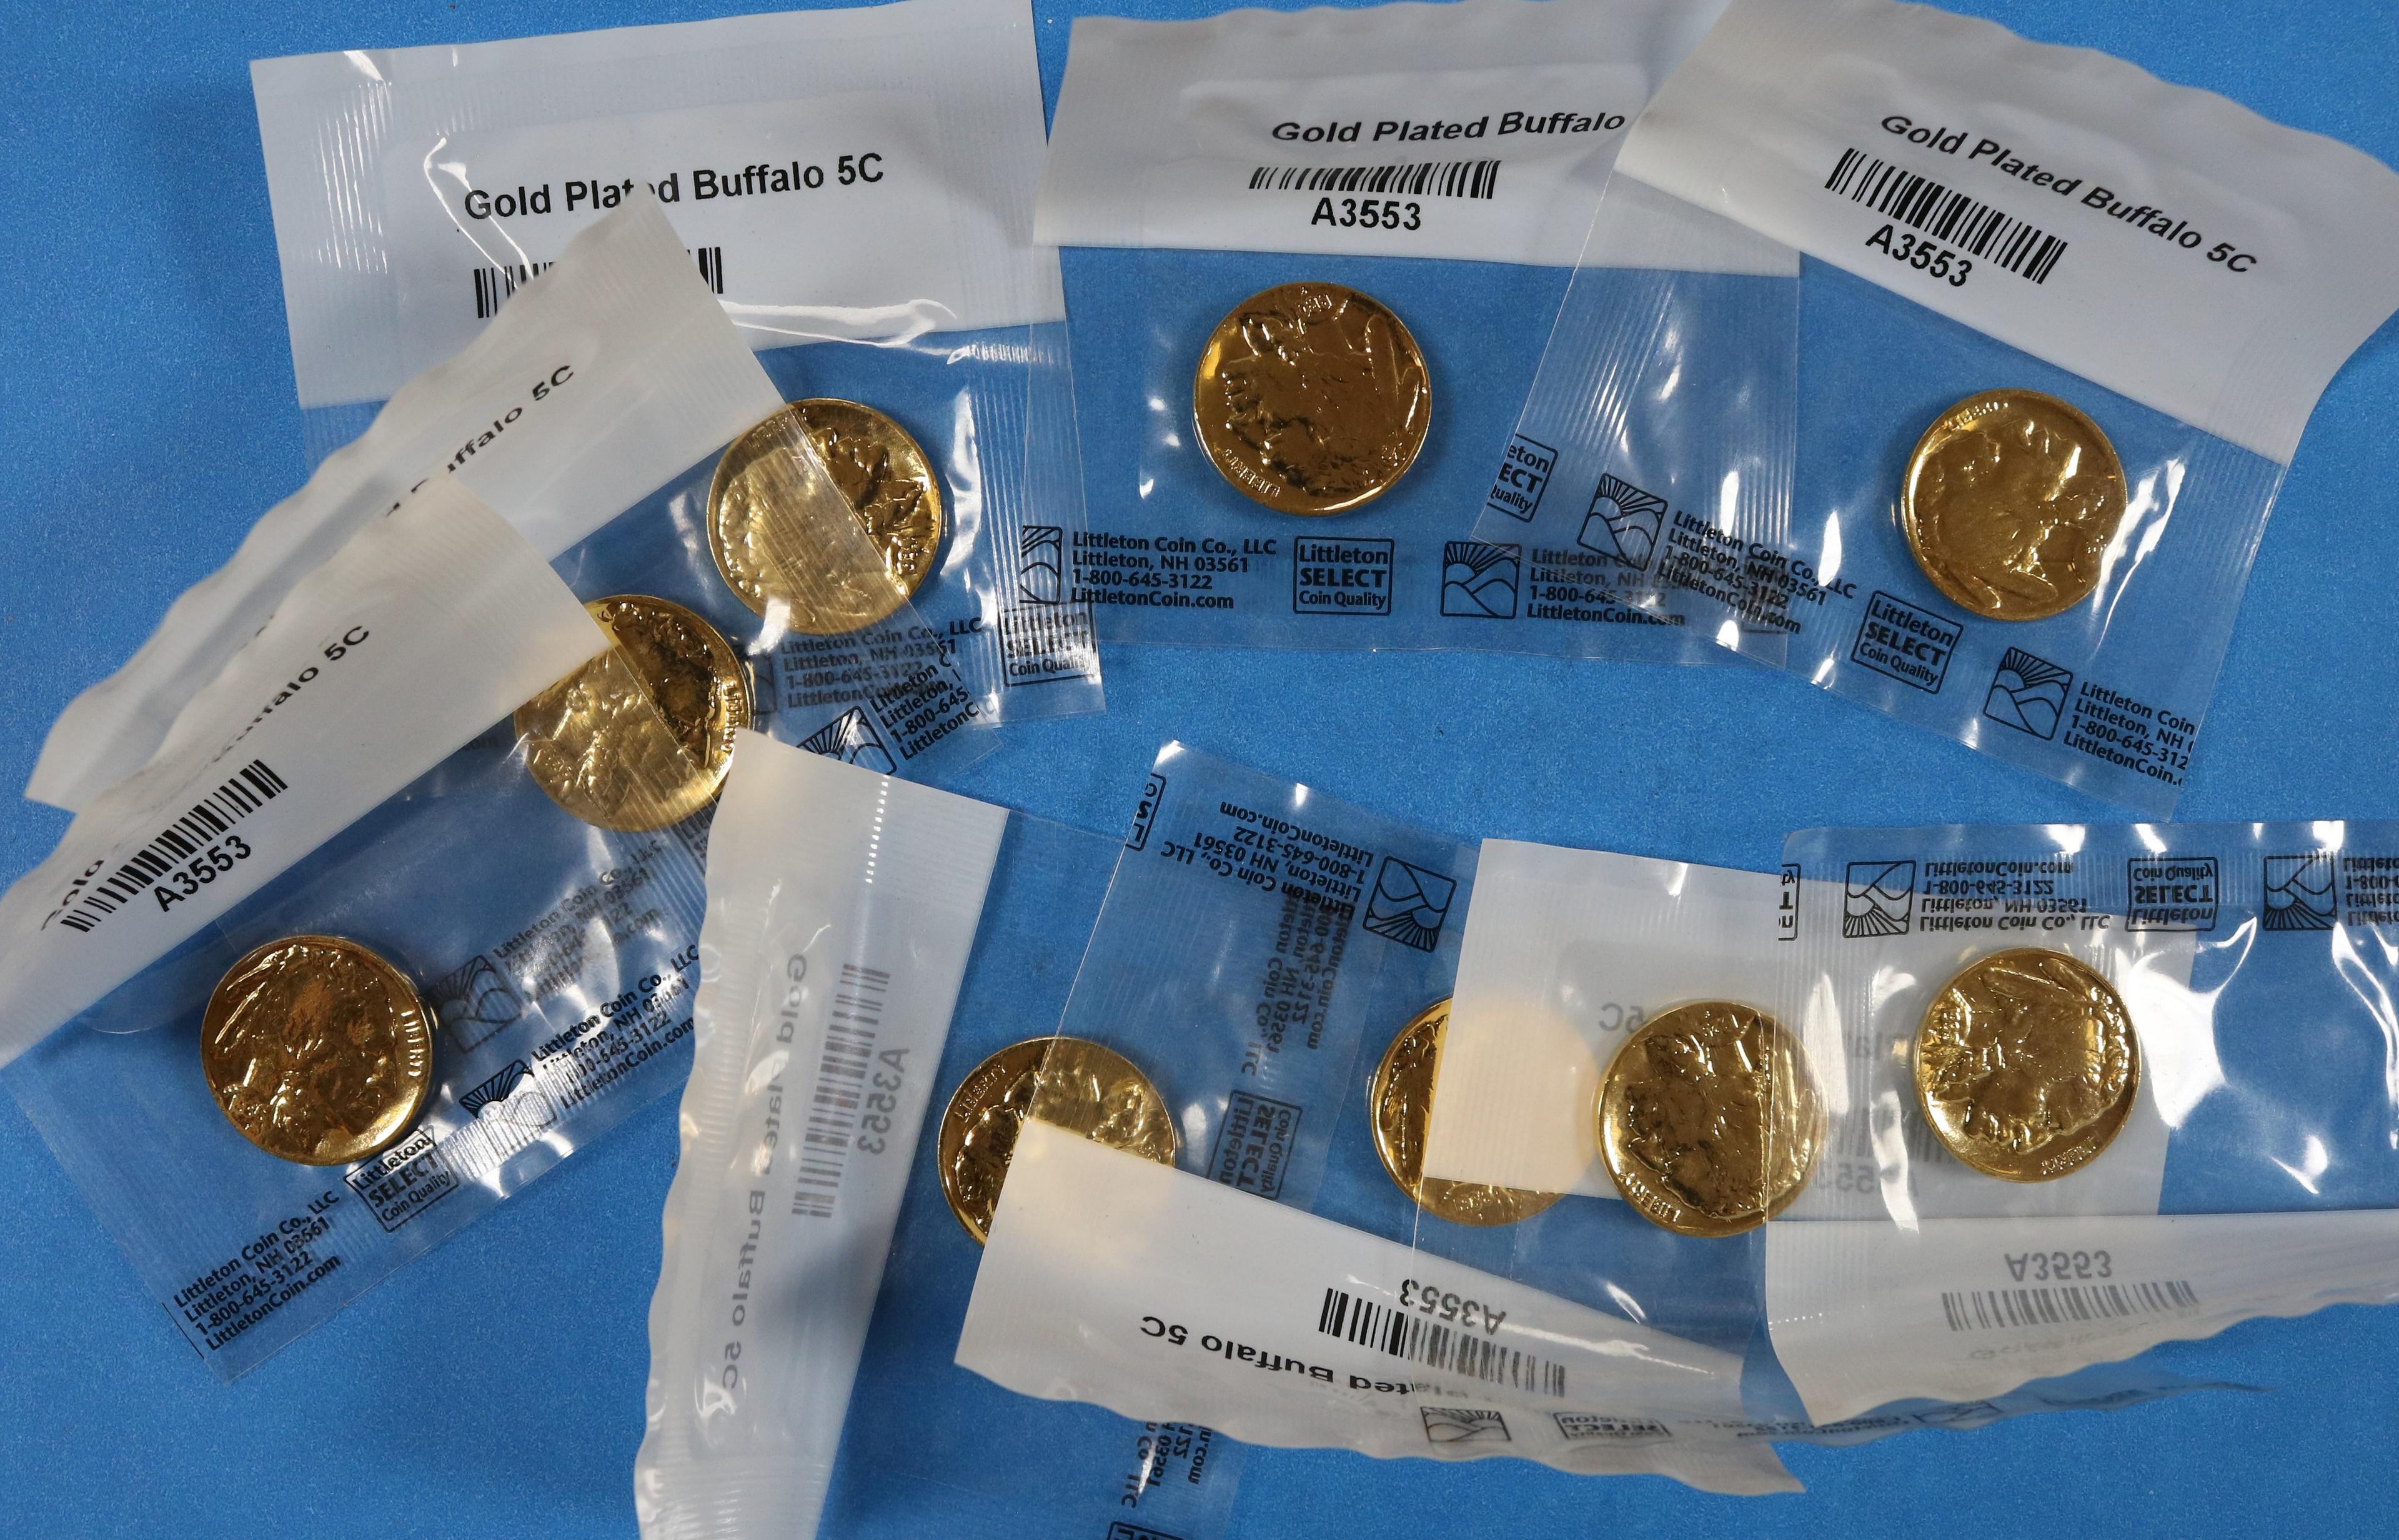 Lot of Gold Plated Buffalo Nickels - 9 Coins total